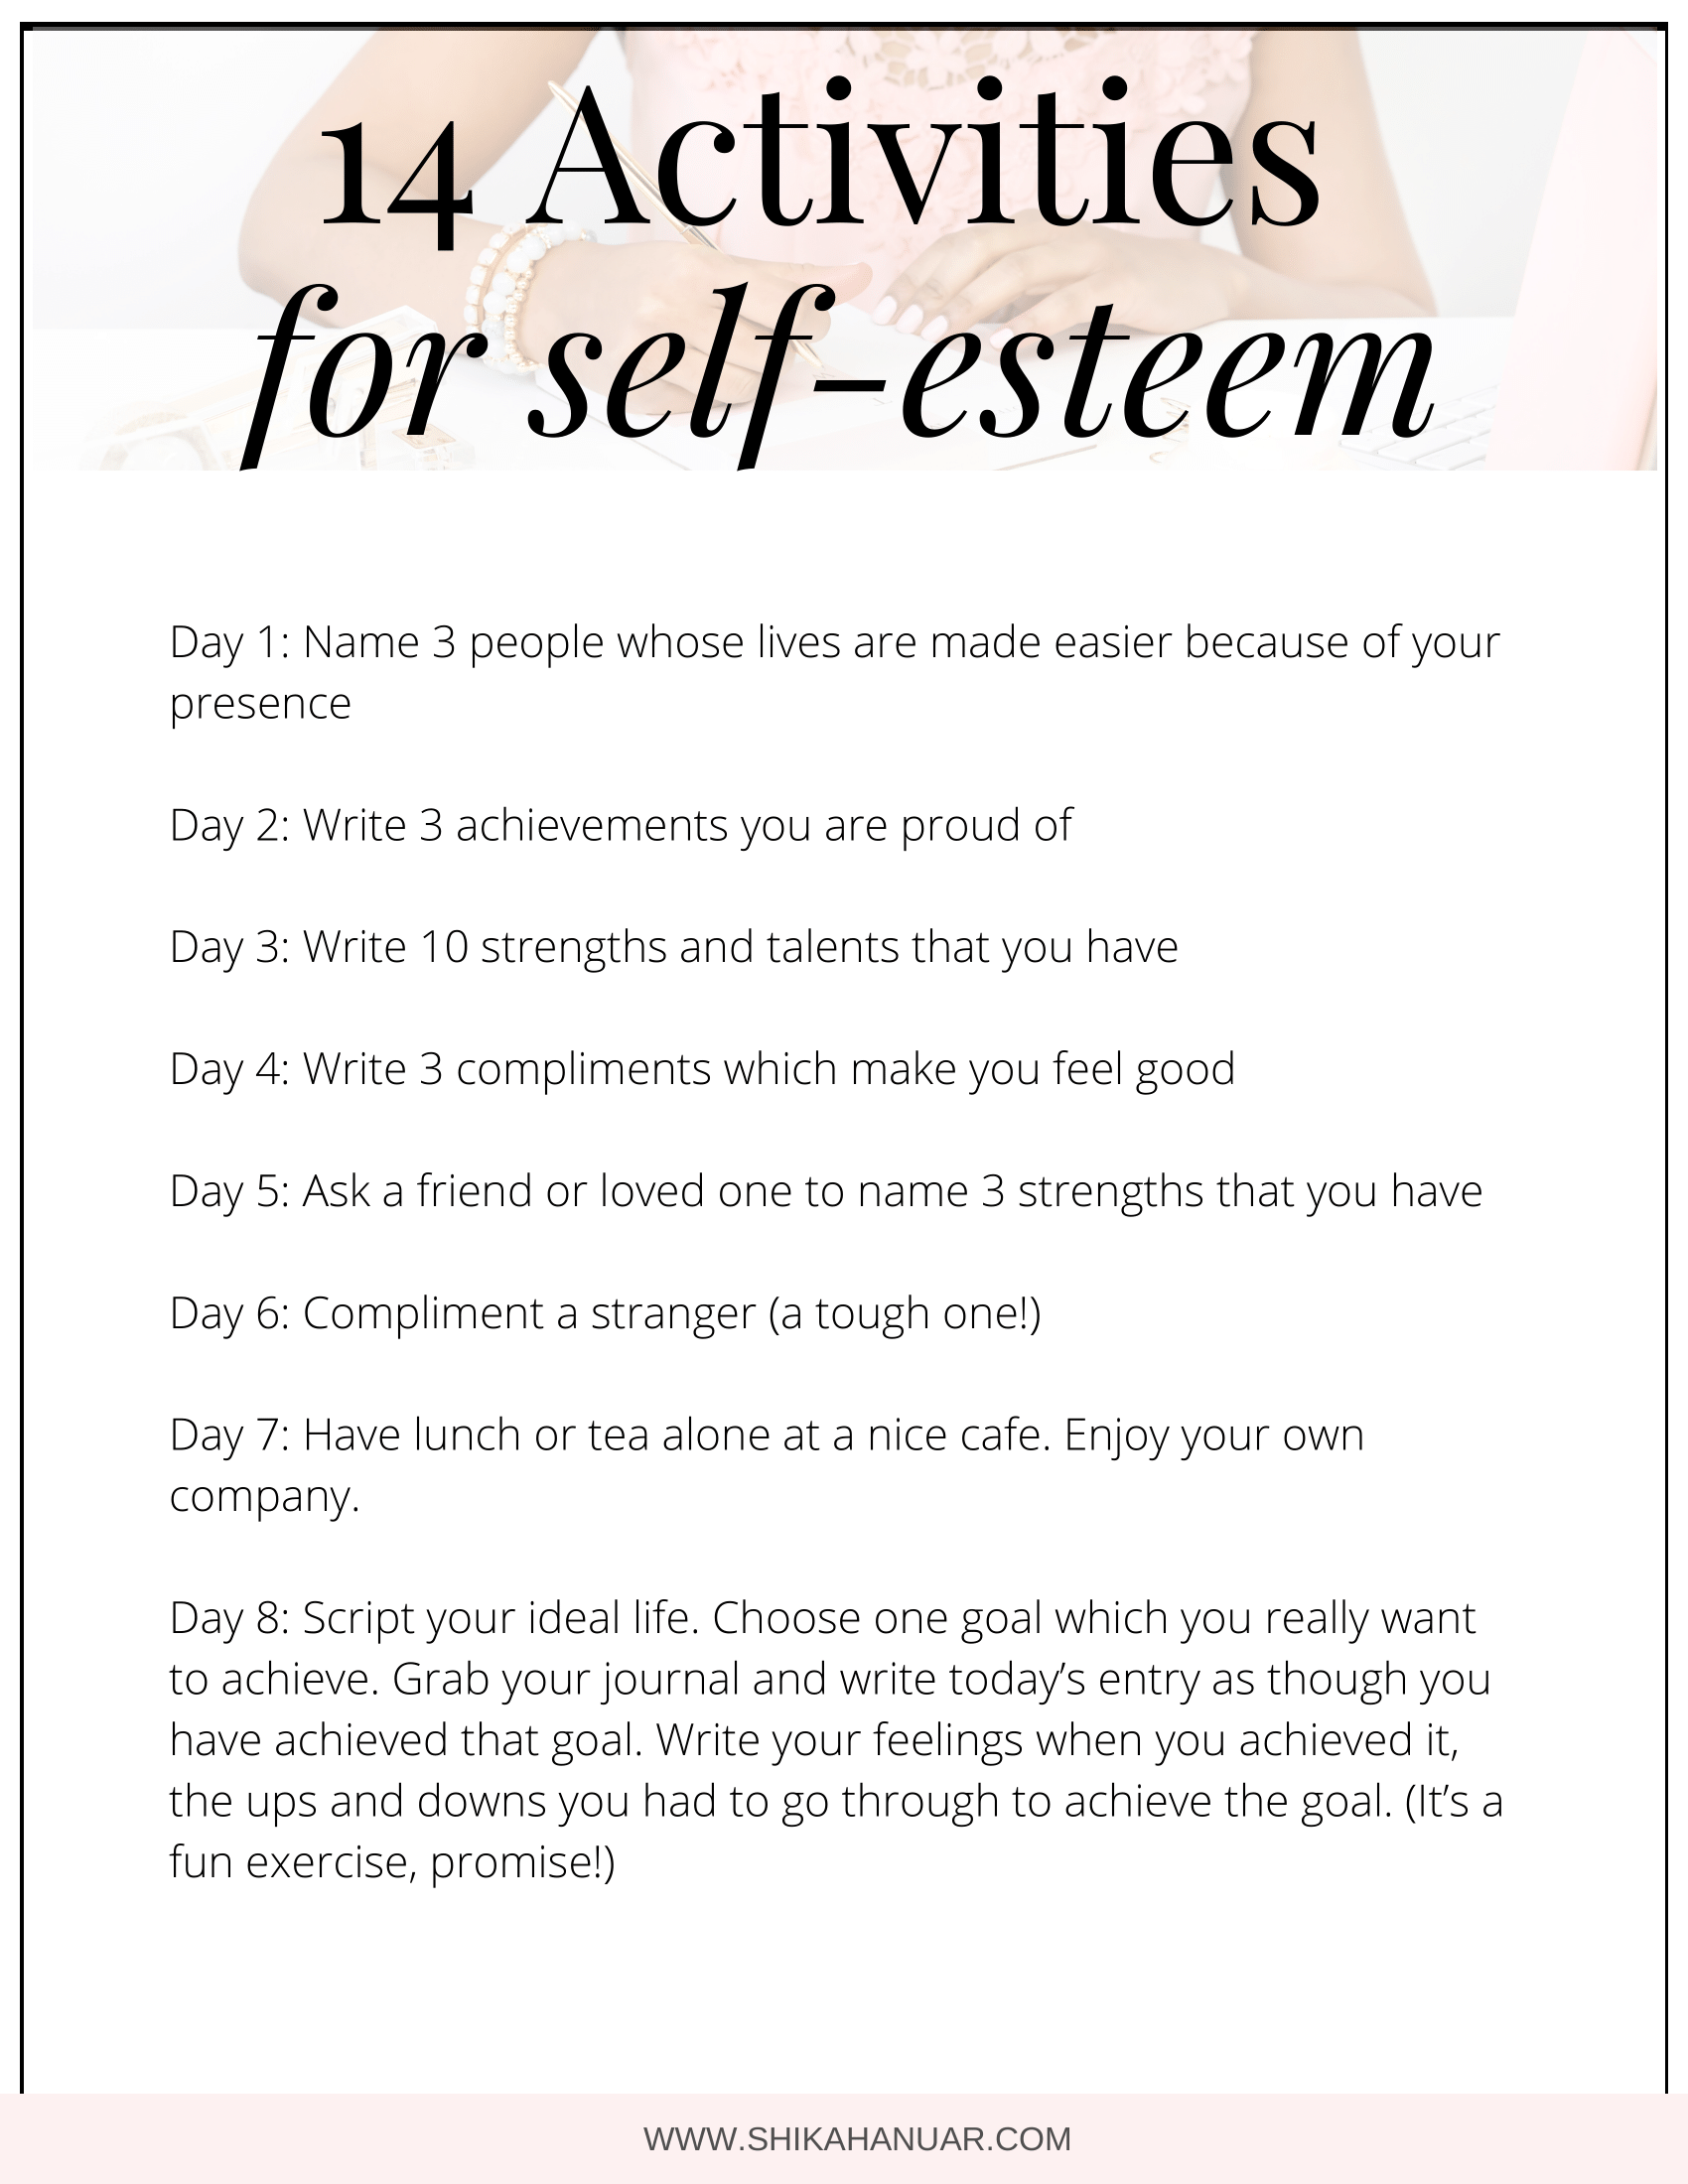 Do You Need Help Building Your Self-Esteem? I&amp;#039;ll Be Sharing